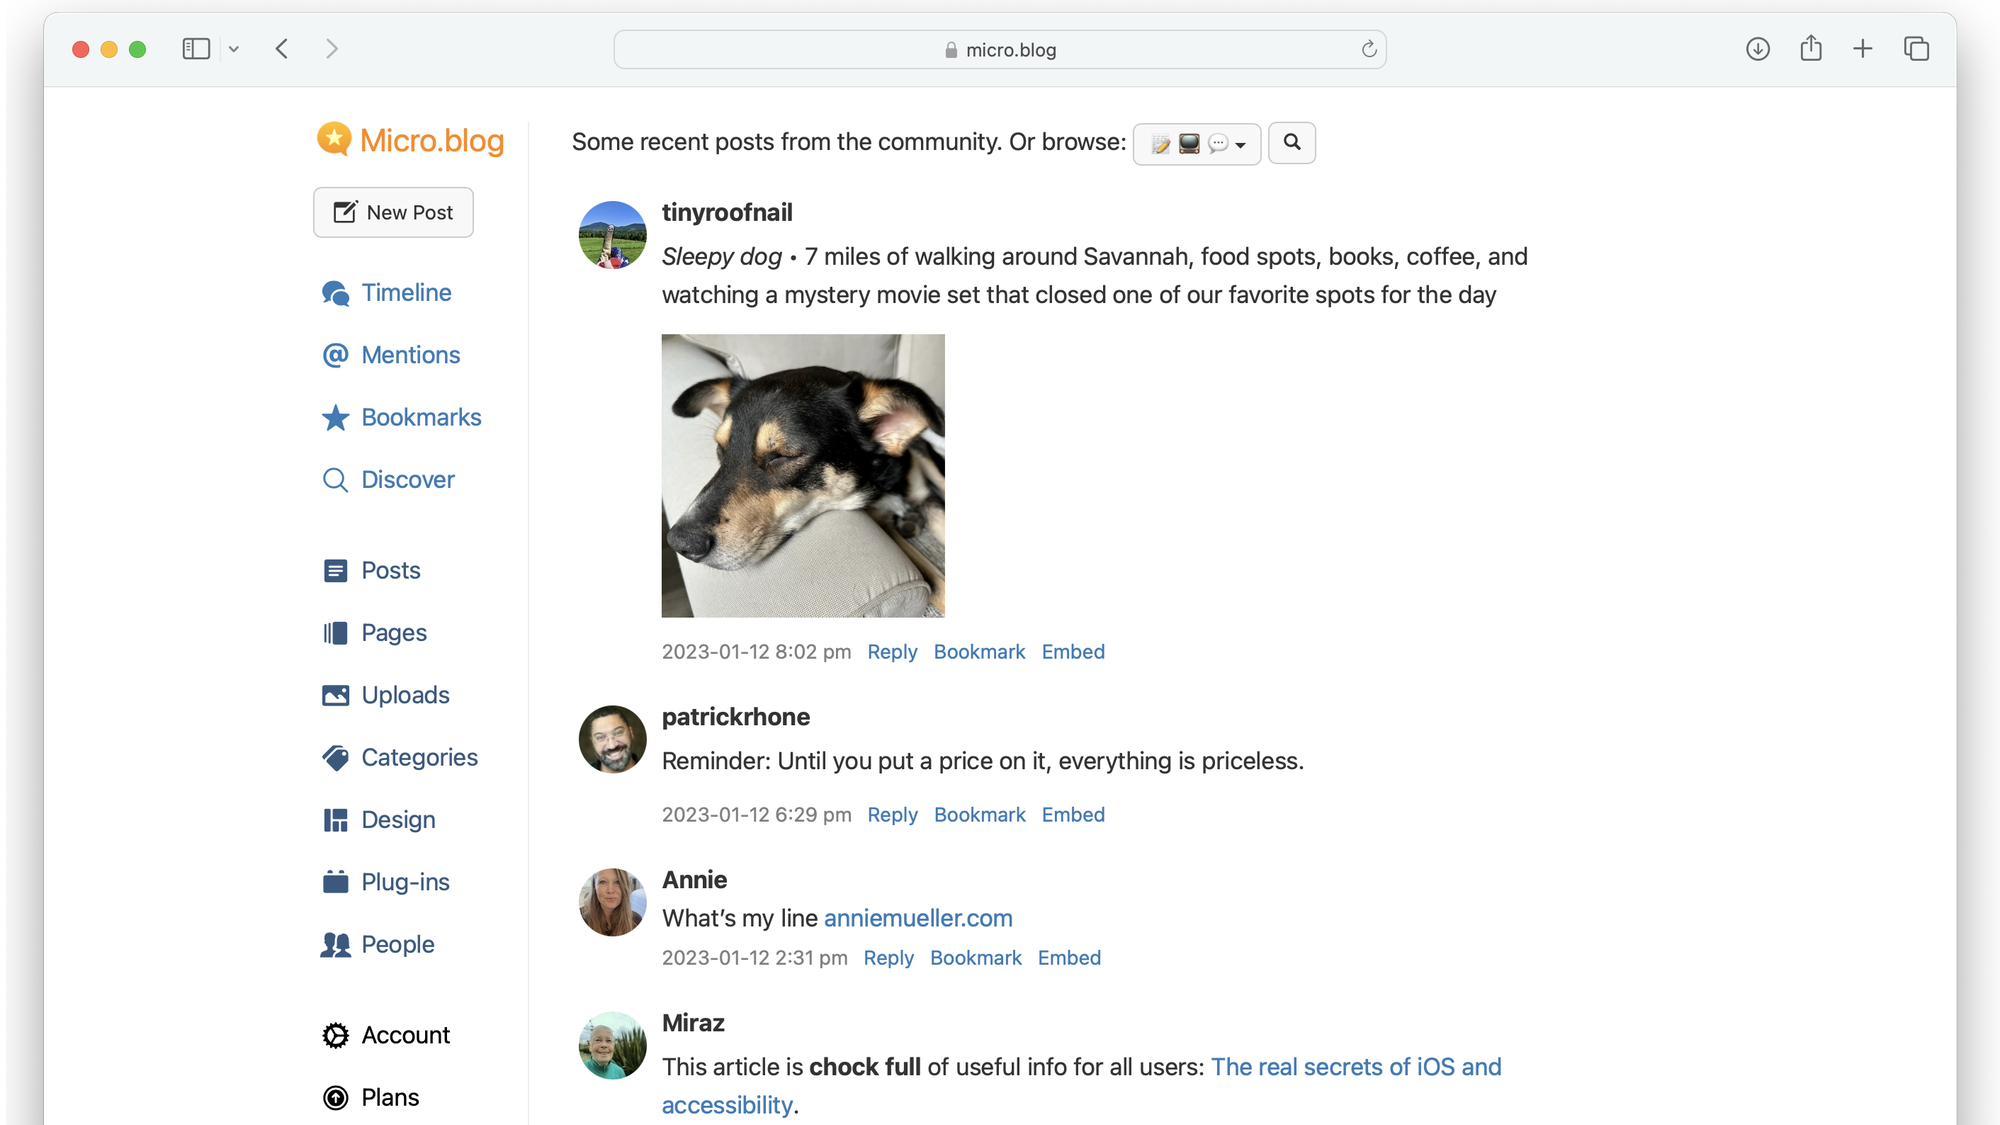 Screenshot showing Micro.blog's discover timeline with several posts from the community.